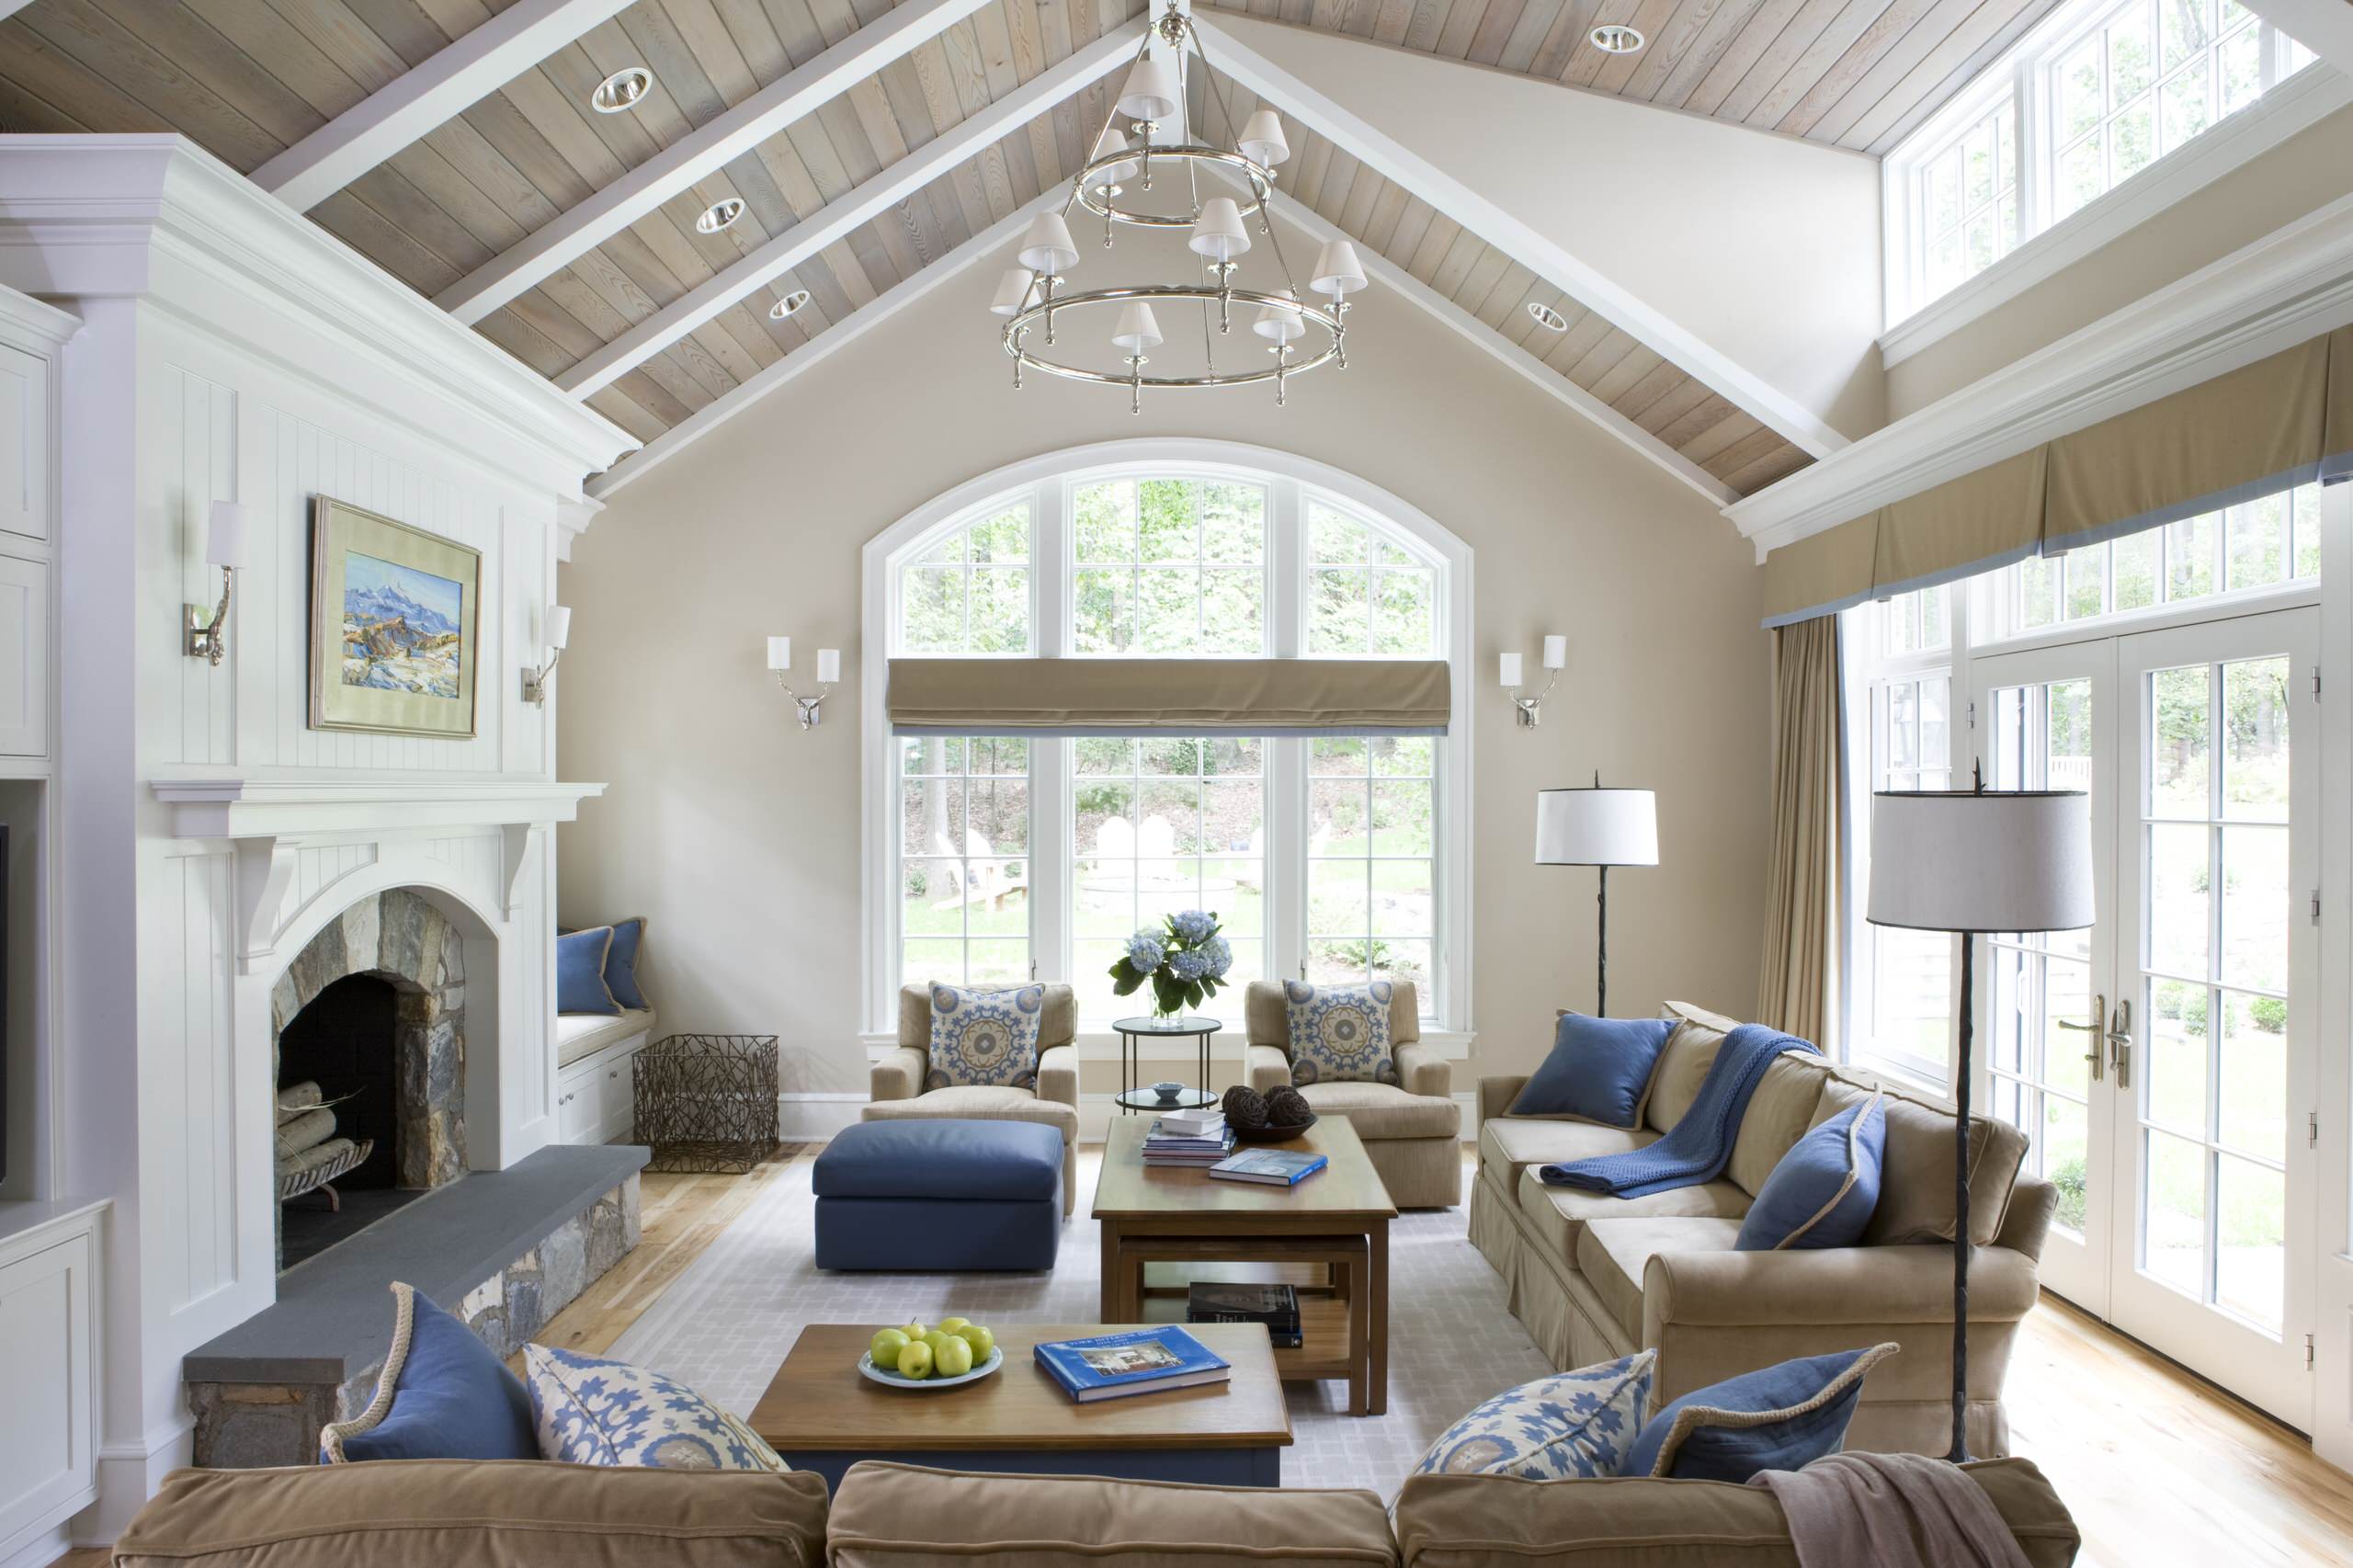 75 Beautiful Large Living Room Pictures Ideas December 2020 Houzz